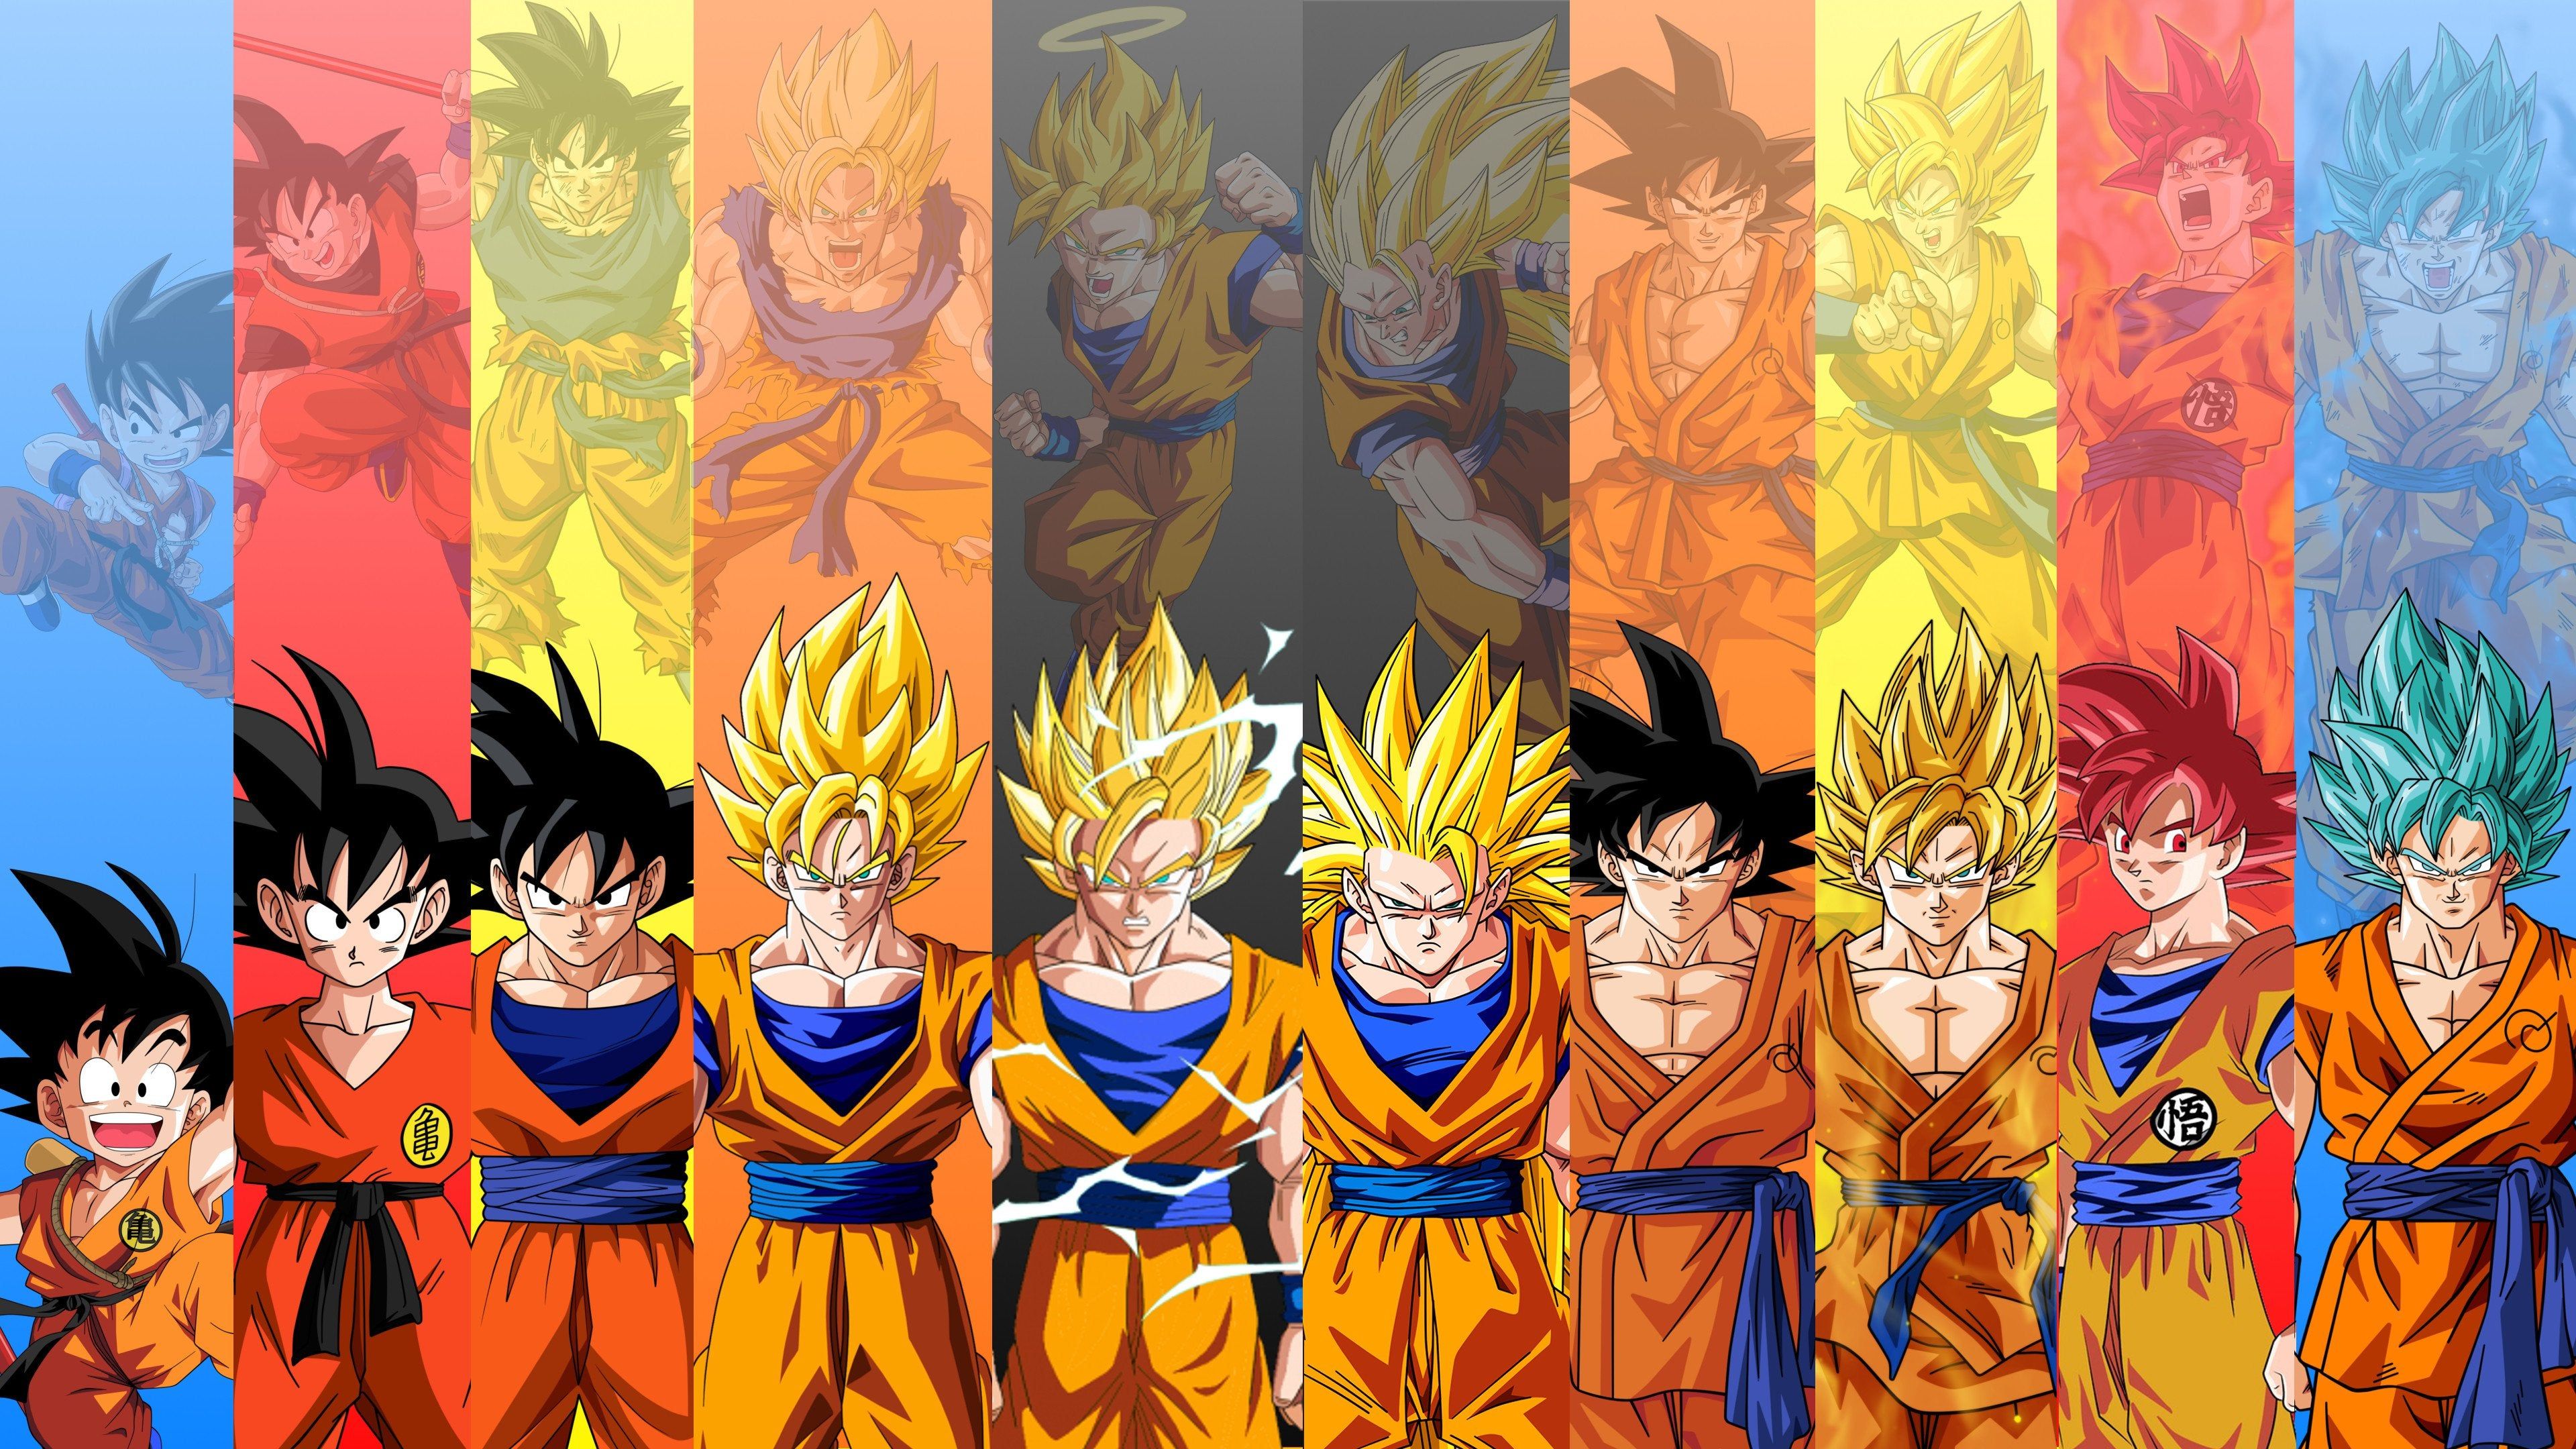 Just made this 4K Wallpaper featuring 10 Forms of Goku from DB, DBZ, and DBS. Enjoy!